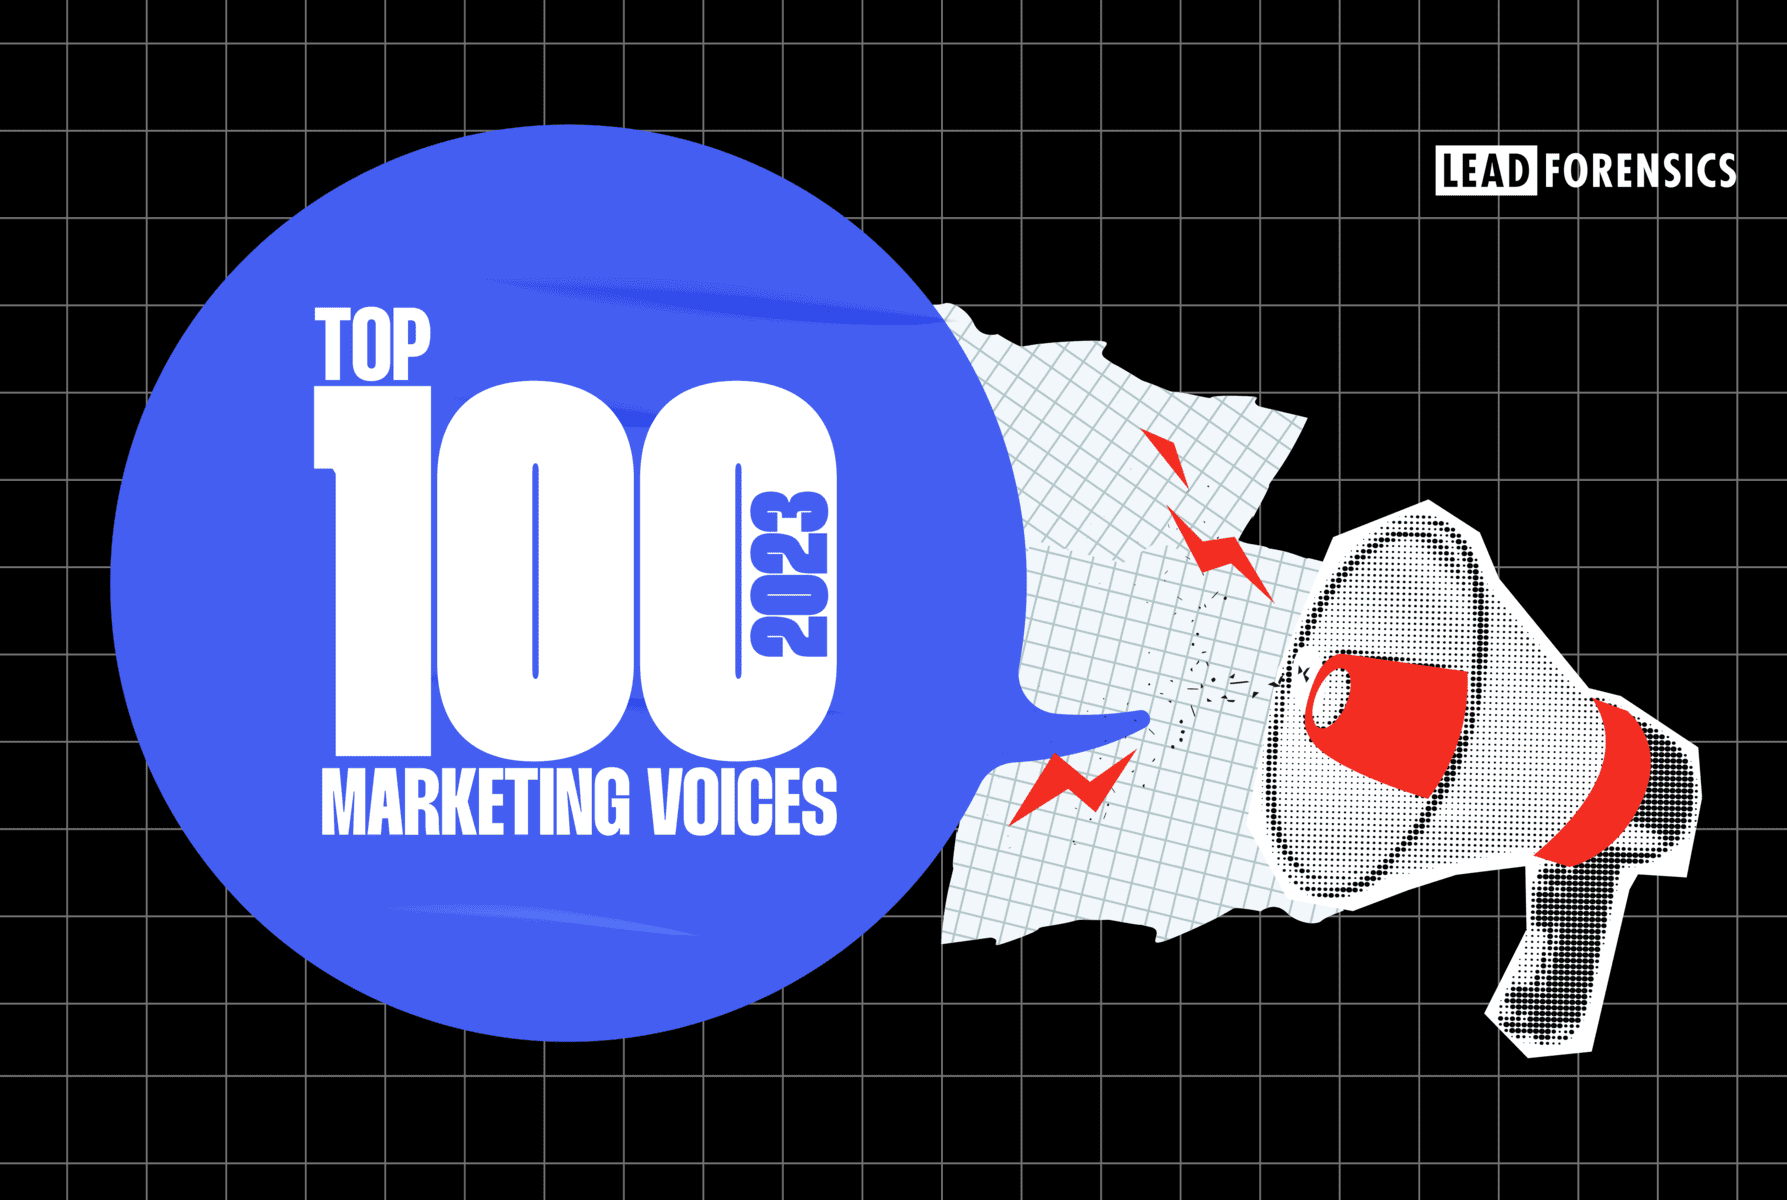 Top 100 Marketing Voices